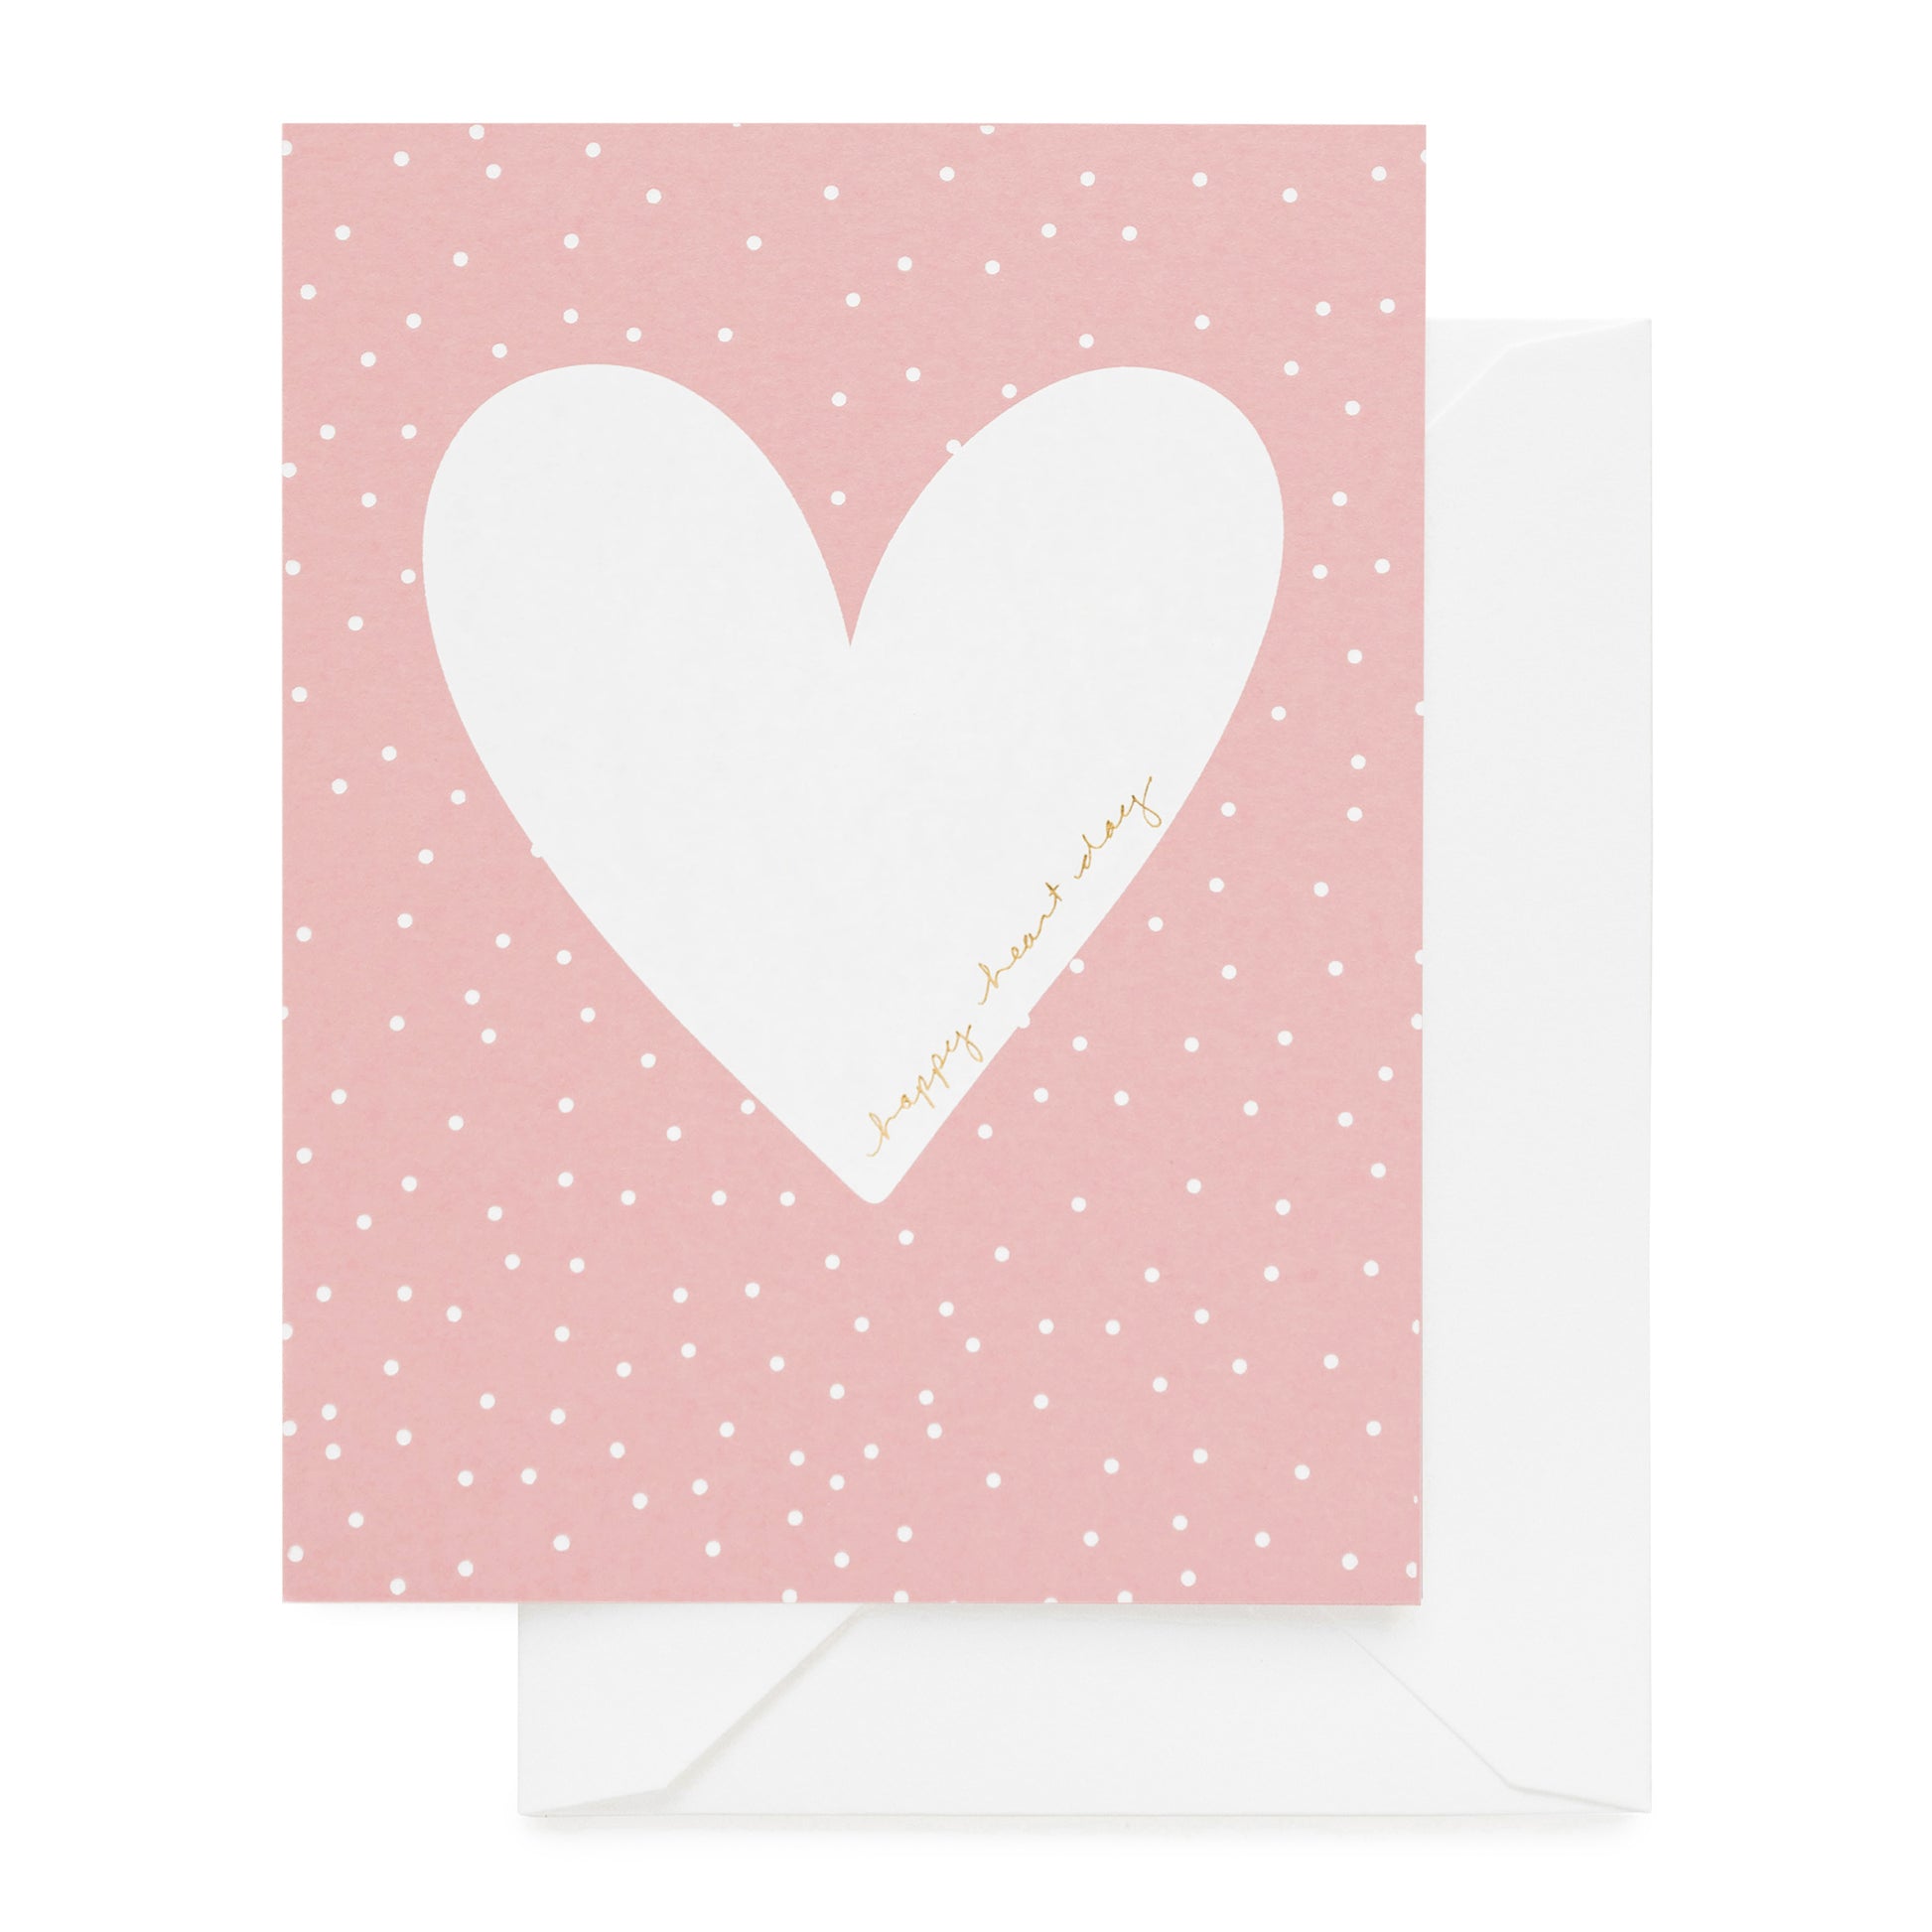 Dusty rose card with white heart and happy heart day printed